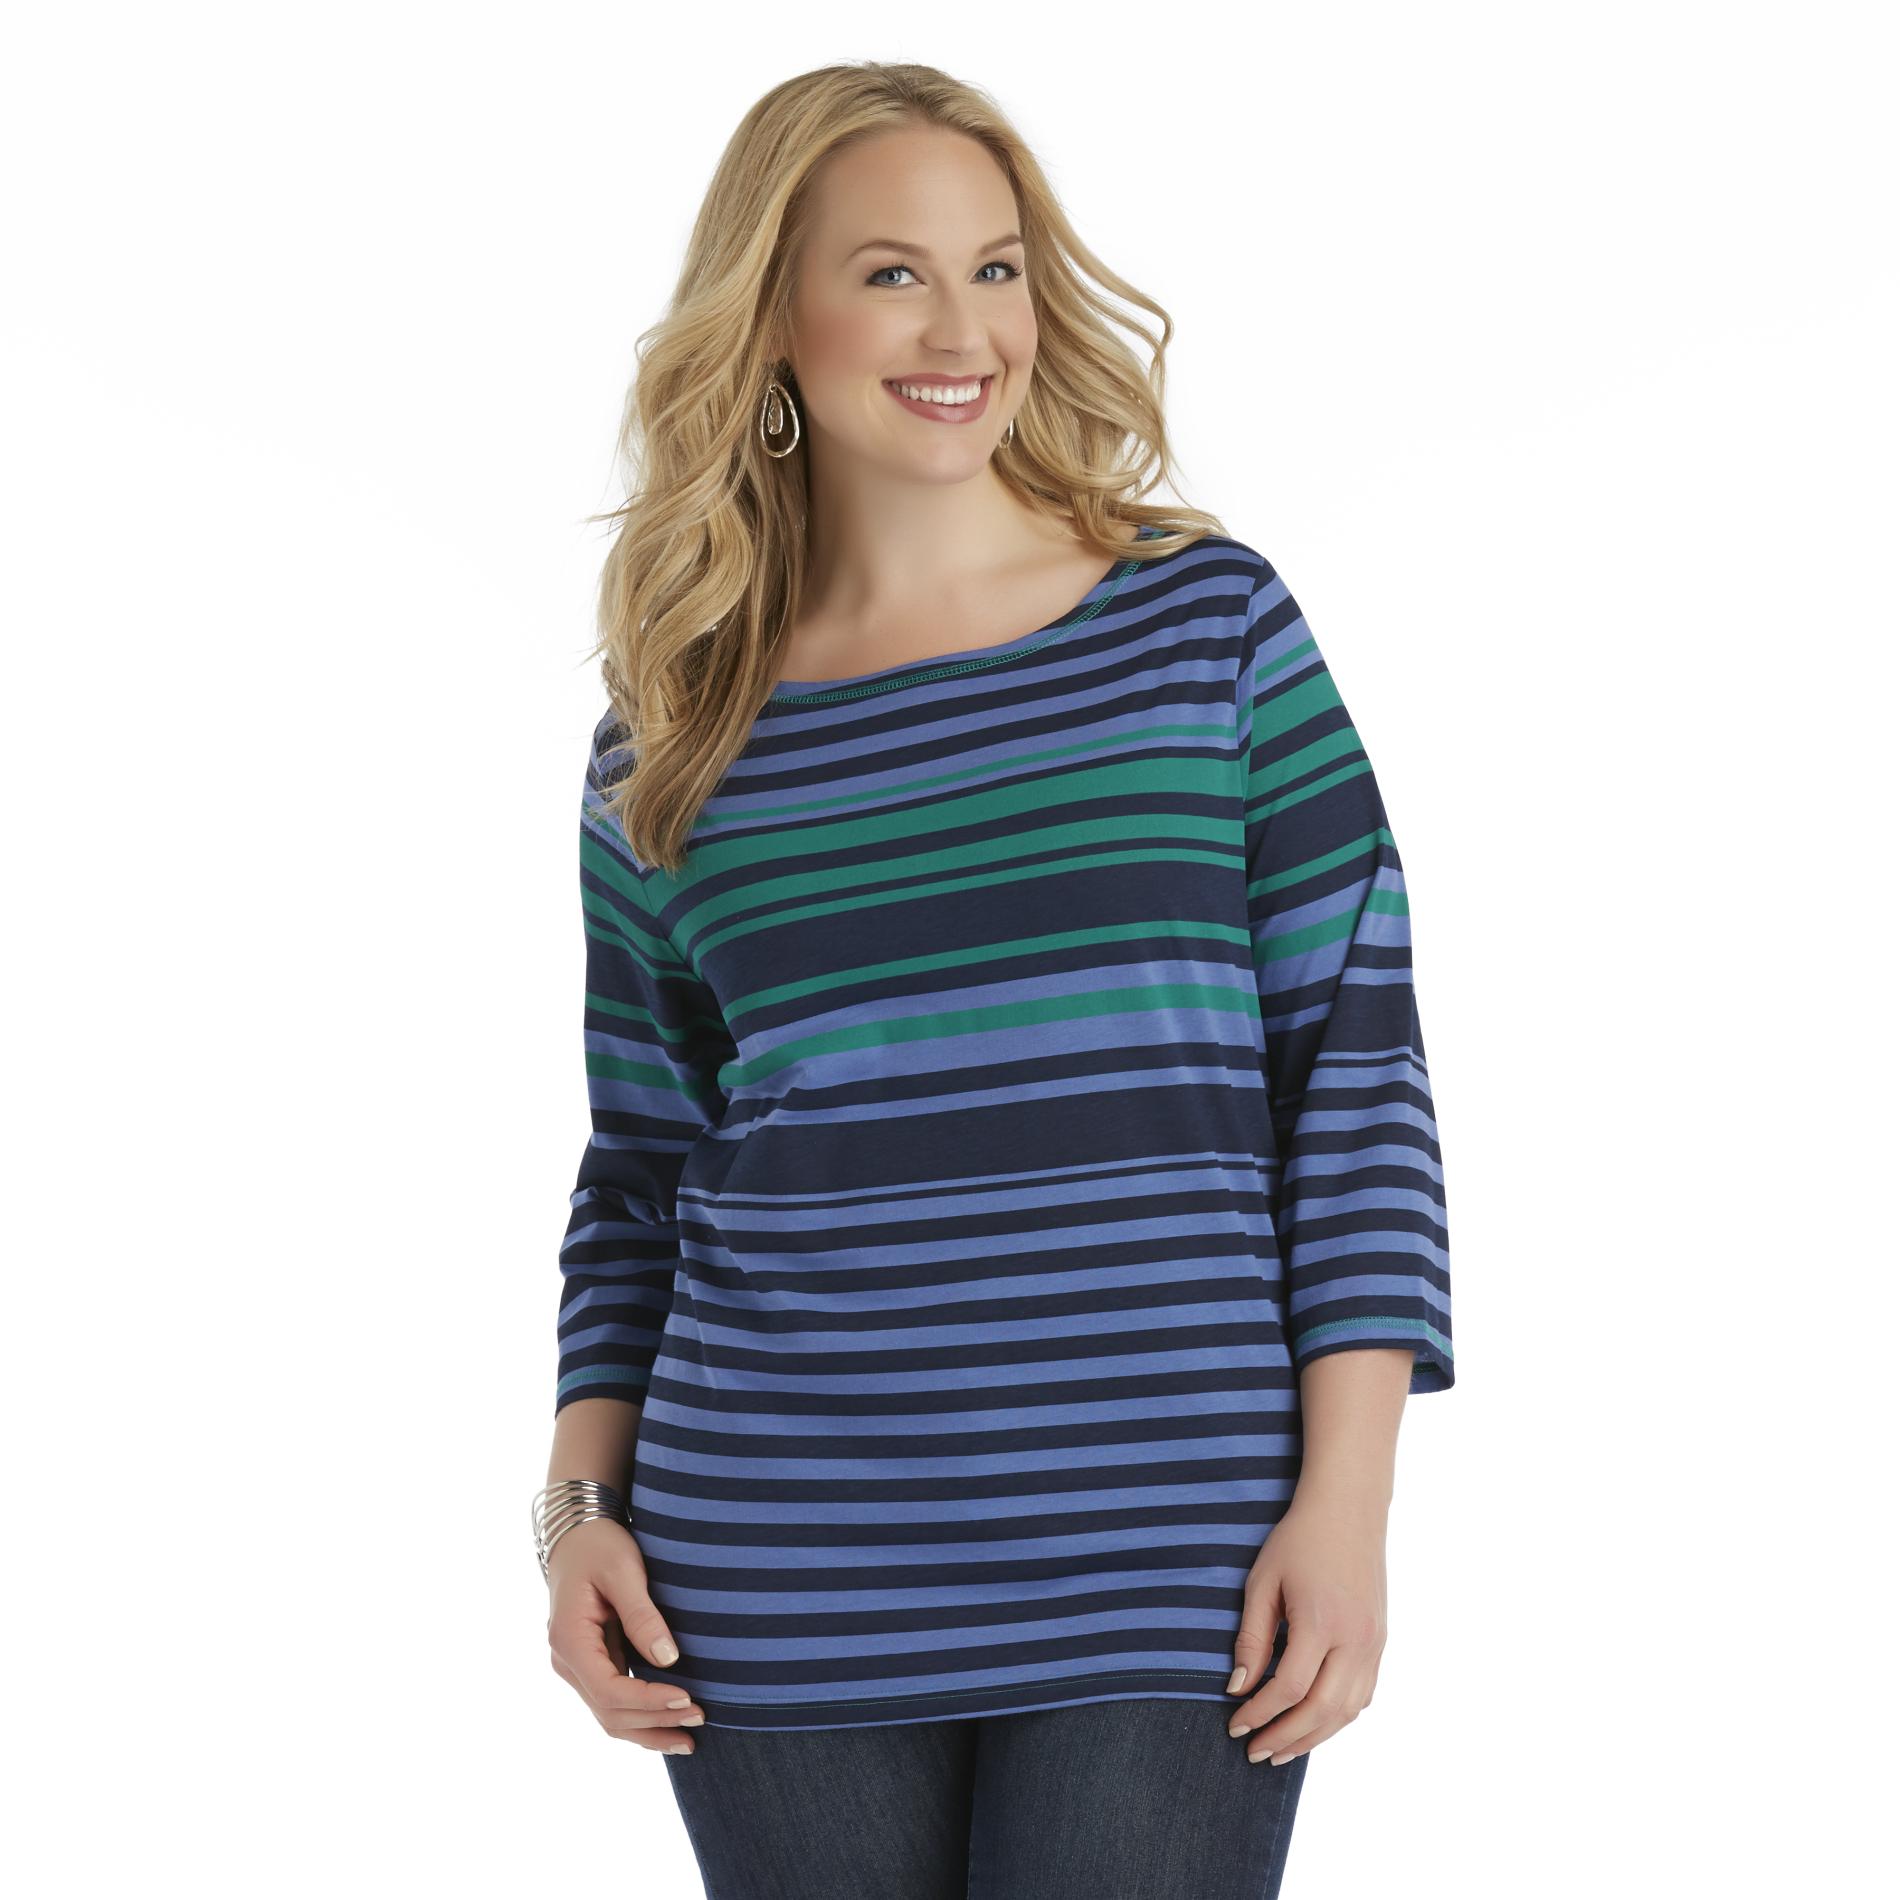 Basic Editions Women's Plus Knit Top - Striped